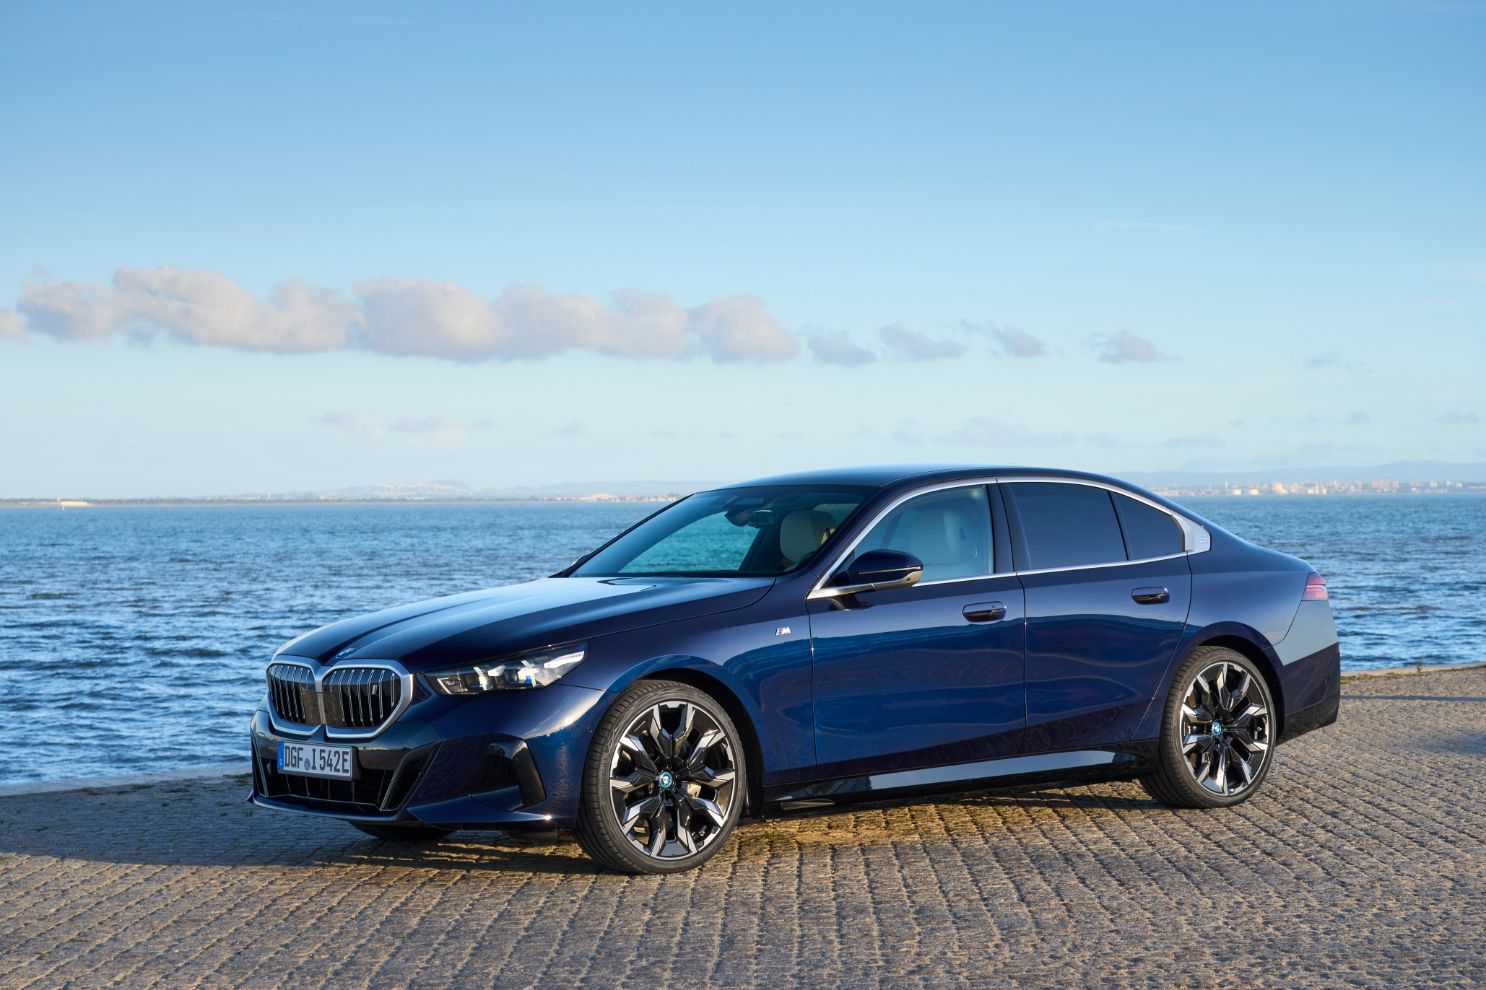 BMW has an all-new electric 5 Series, and we've driven it: The 2024 BMW i5